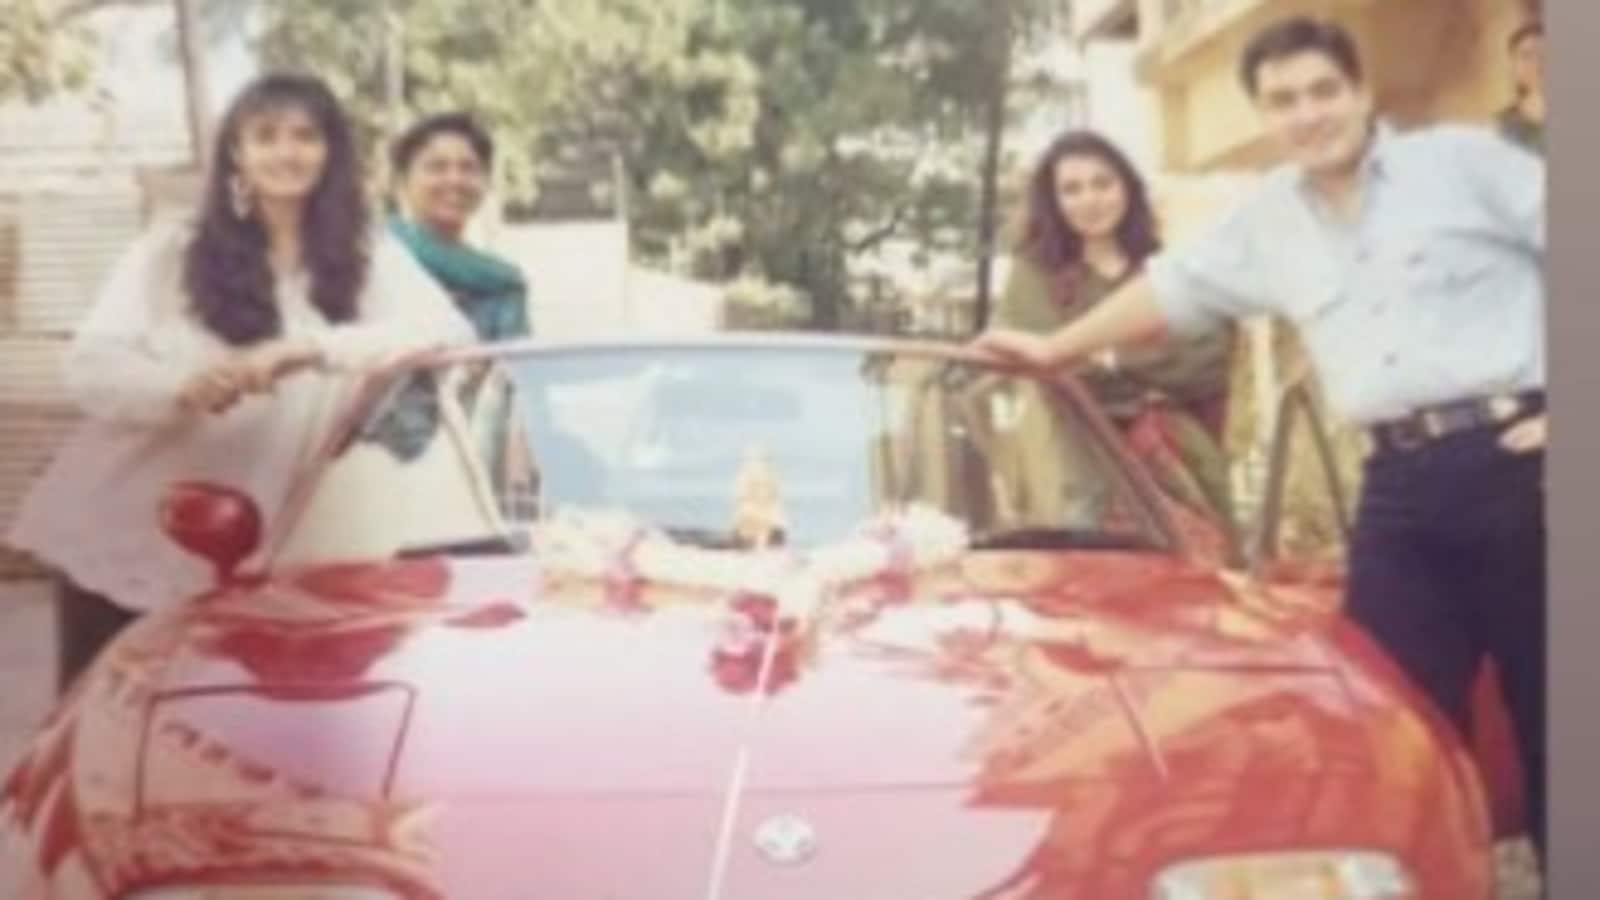 Raveena Tandonxxxx - Raveena Tandon throws it back to the time she was 18 and bought her first  'swanky' sports car | Bollywood - Hindustan Times